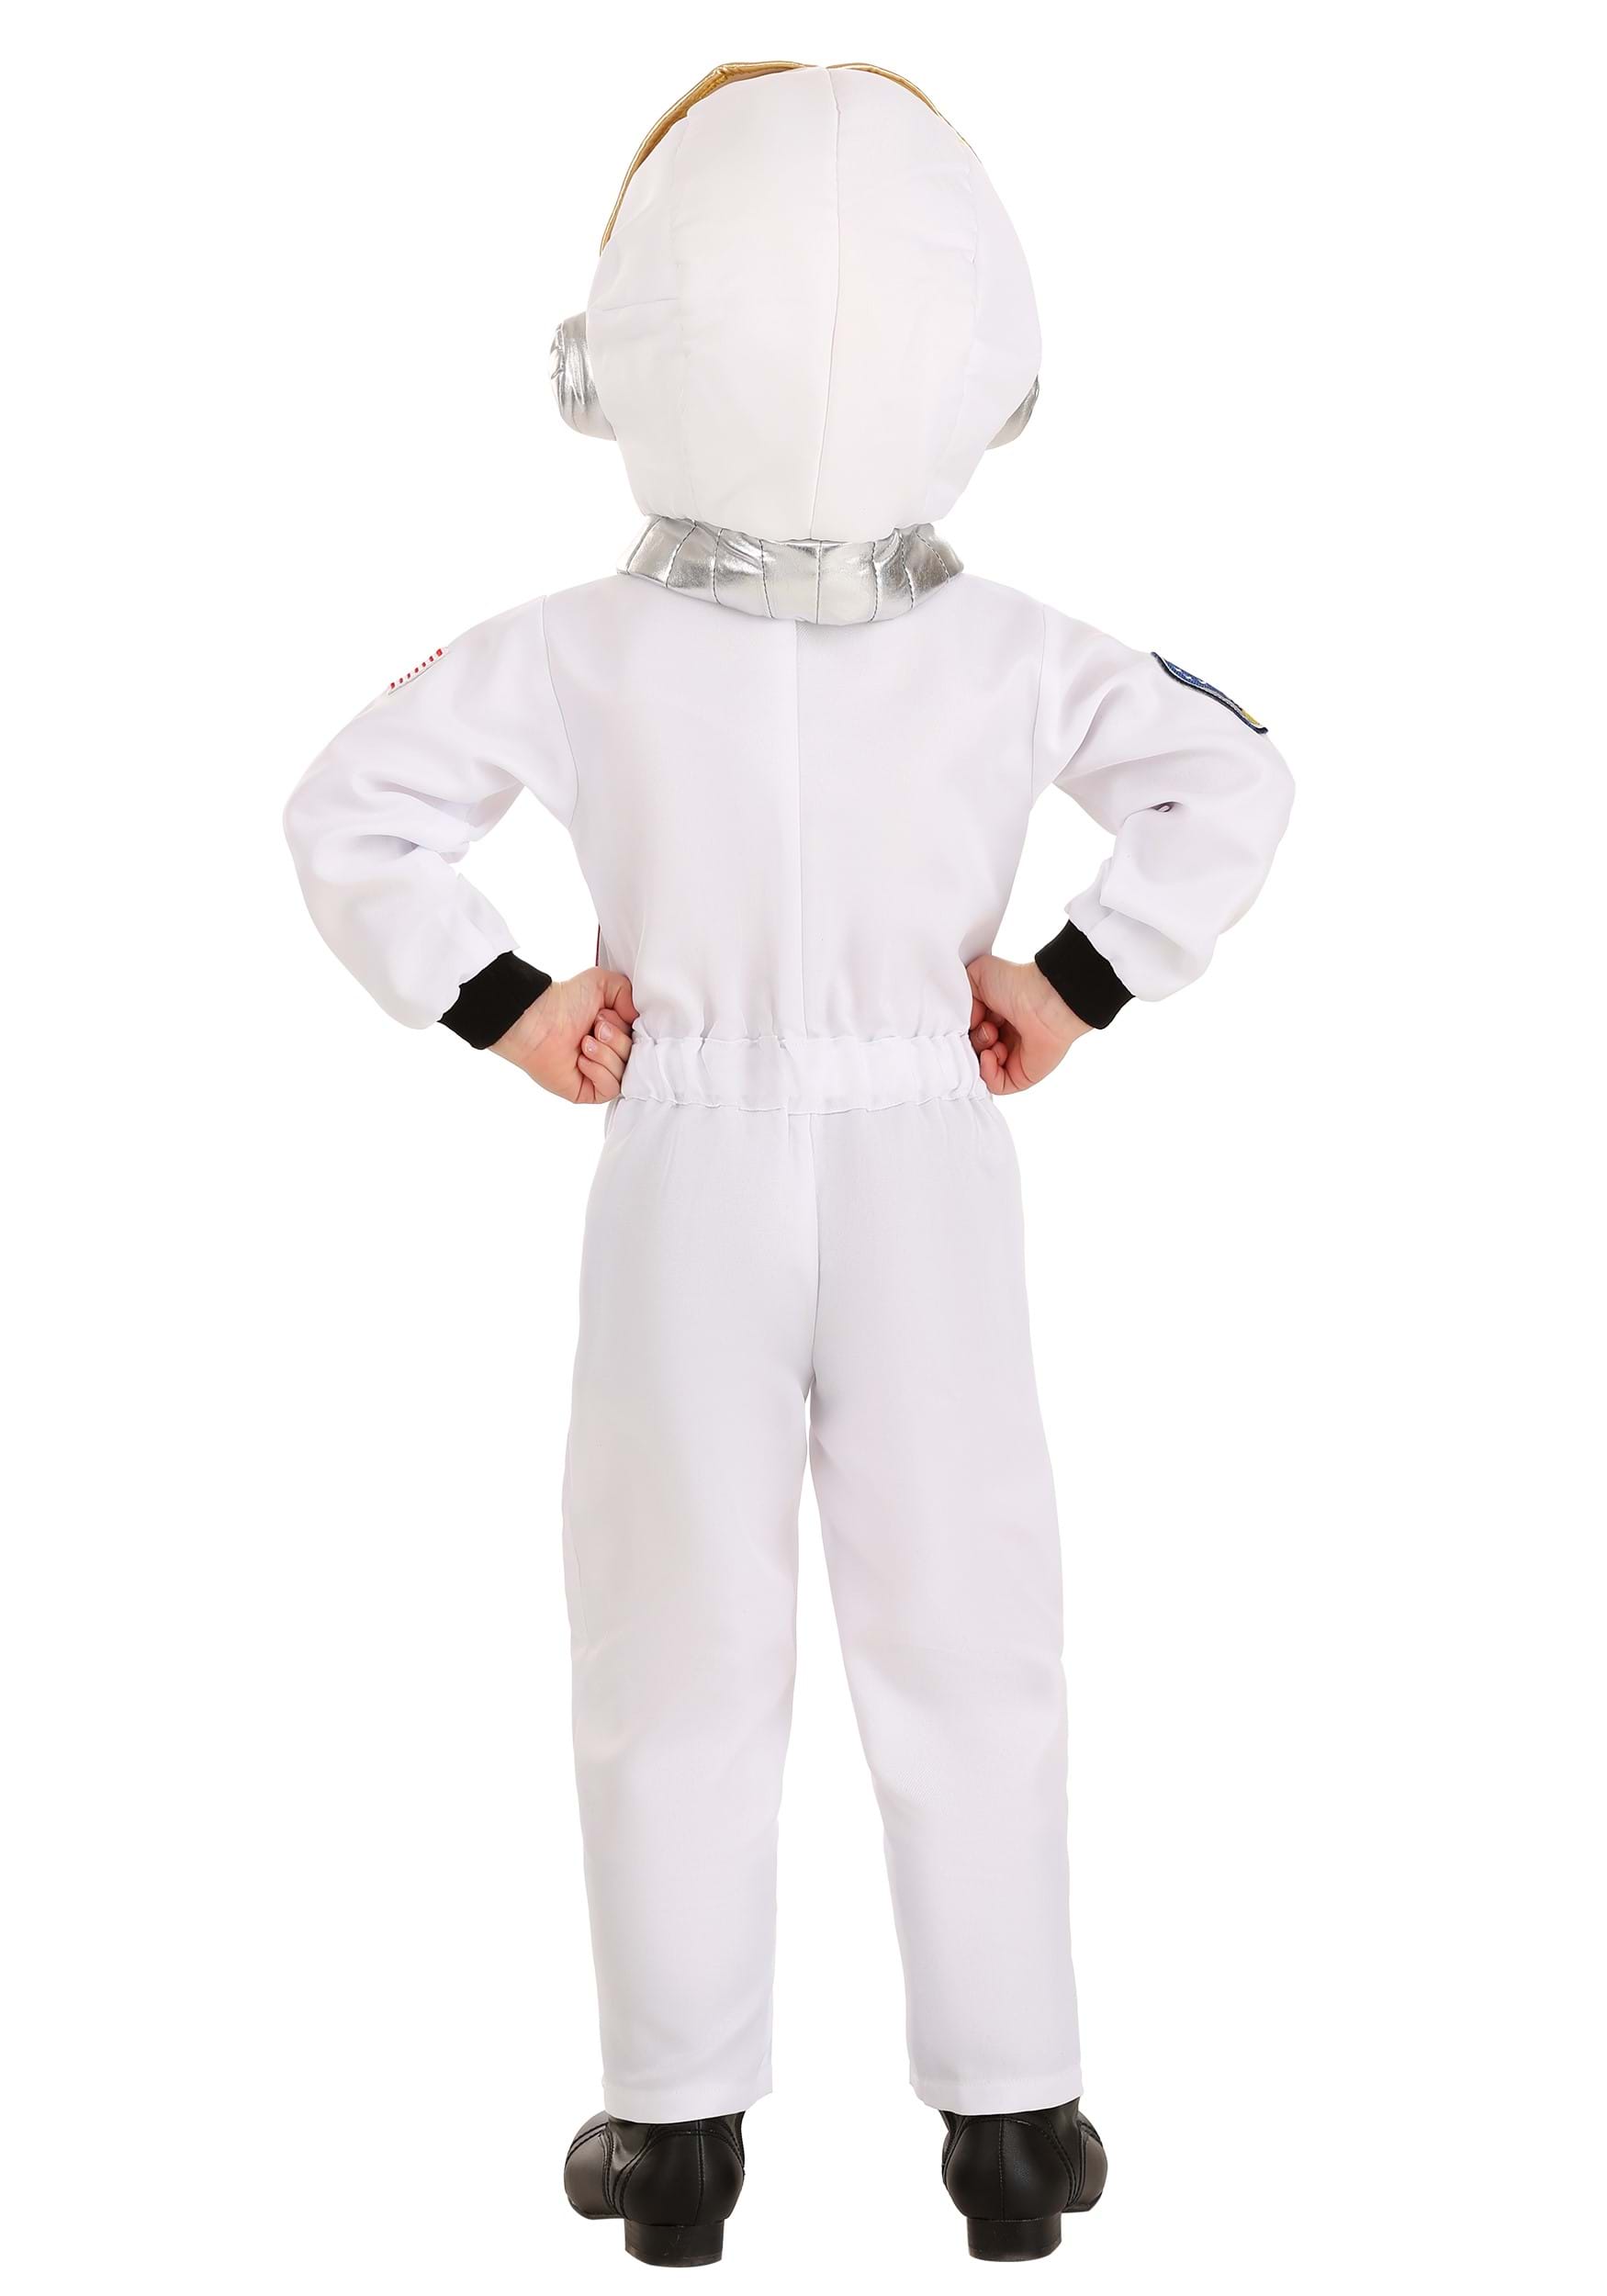 White Astronaut Jumpsuit Costume For Toddlers